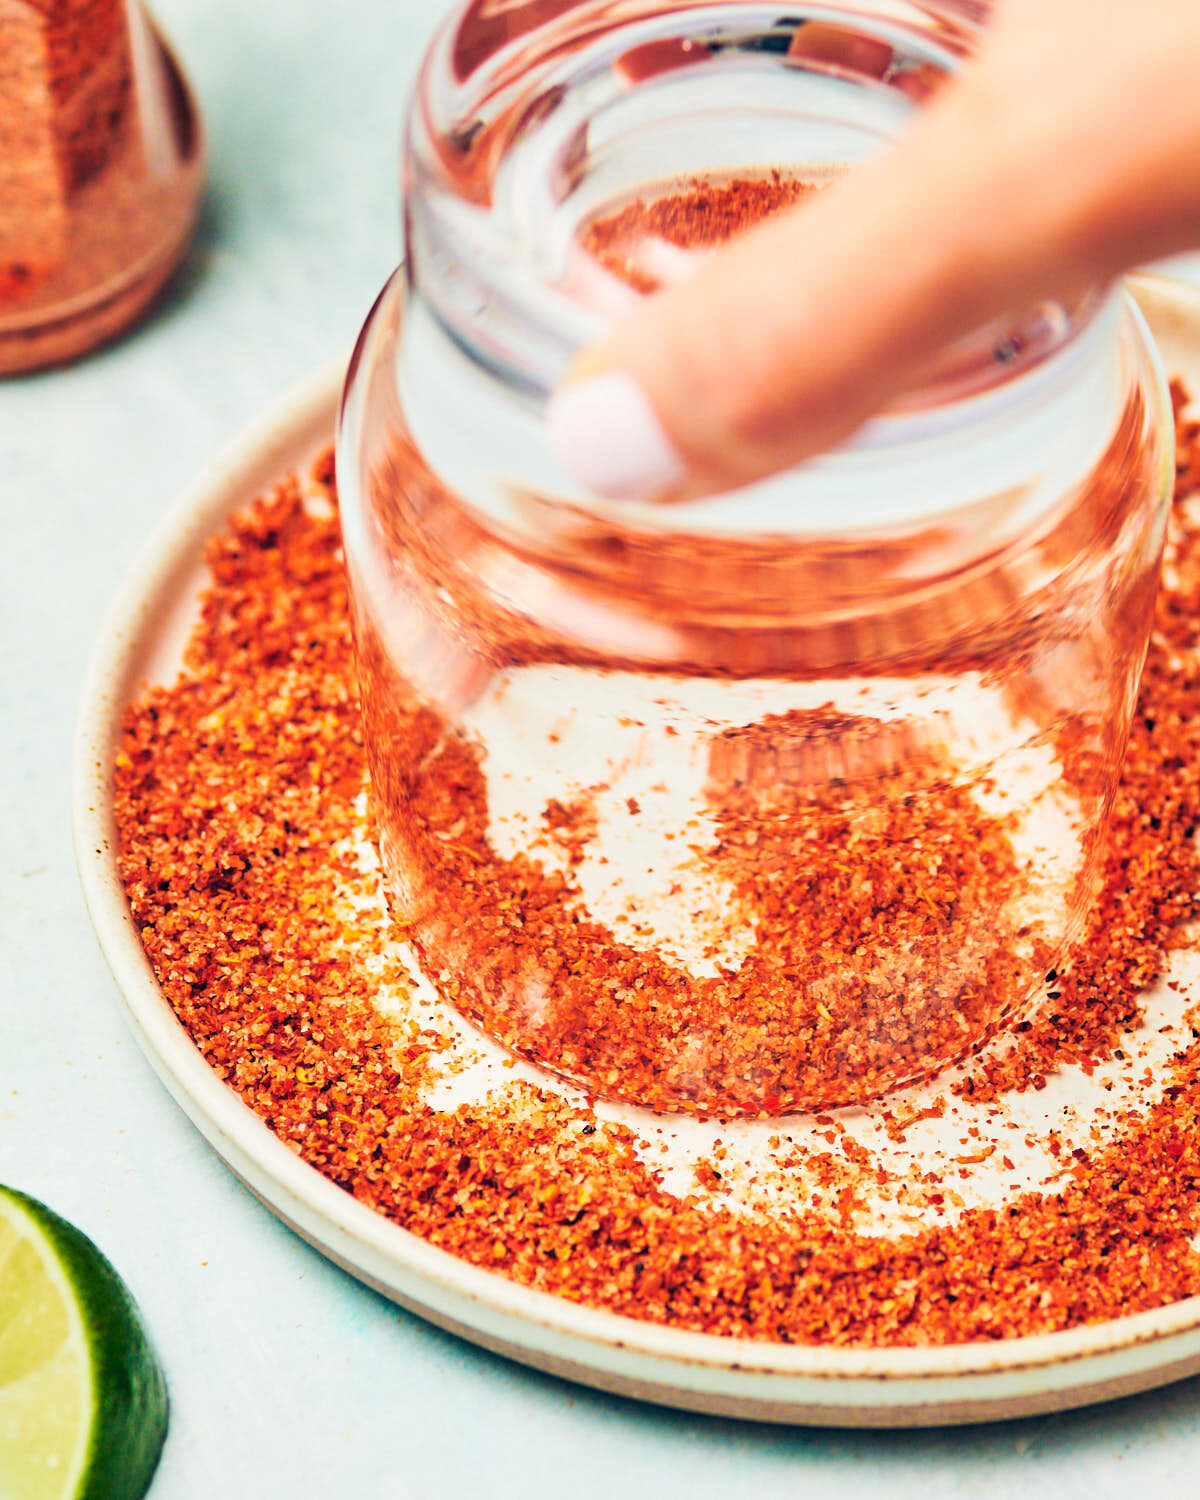 Rimming a glass with Tajin, a lime chili seasoning, for margaritas.